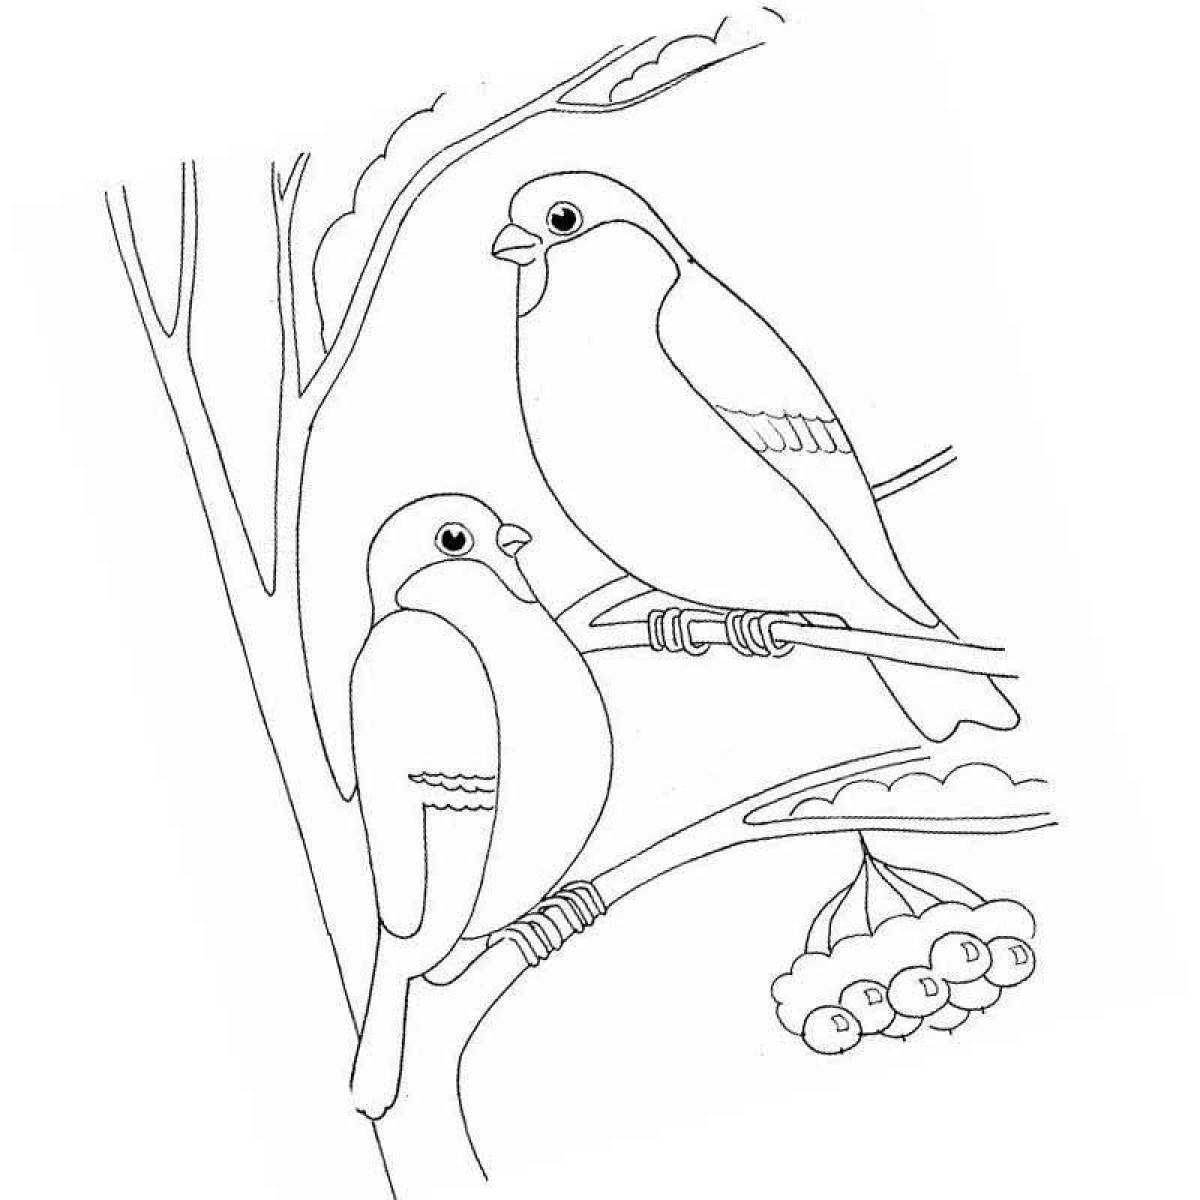 Amazing coloring pages of wintering birds for children 3-4 years old